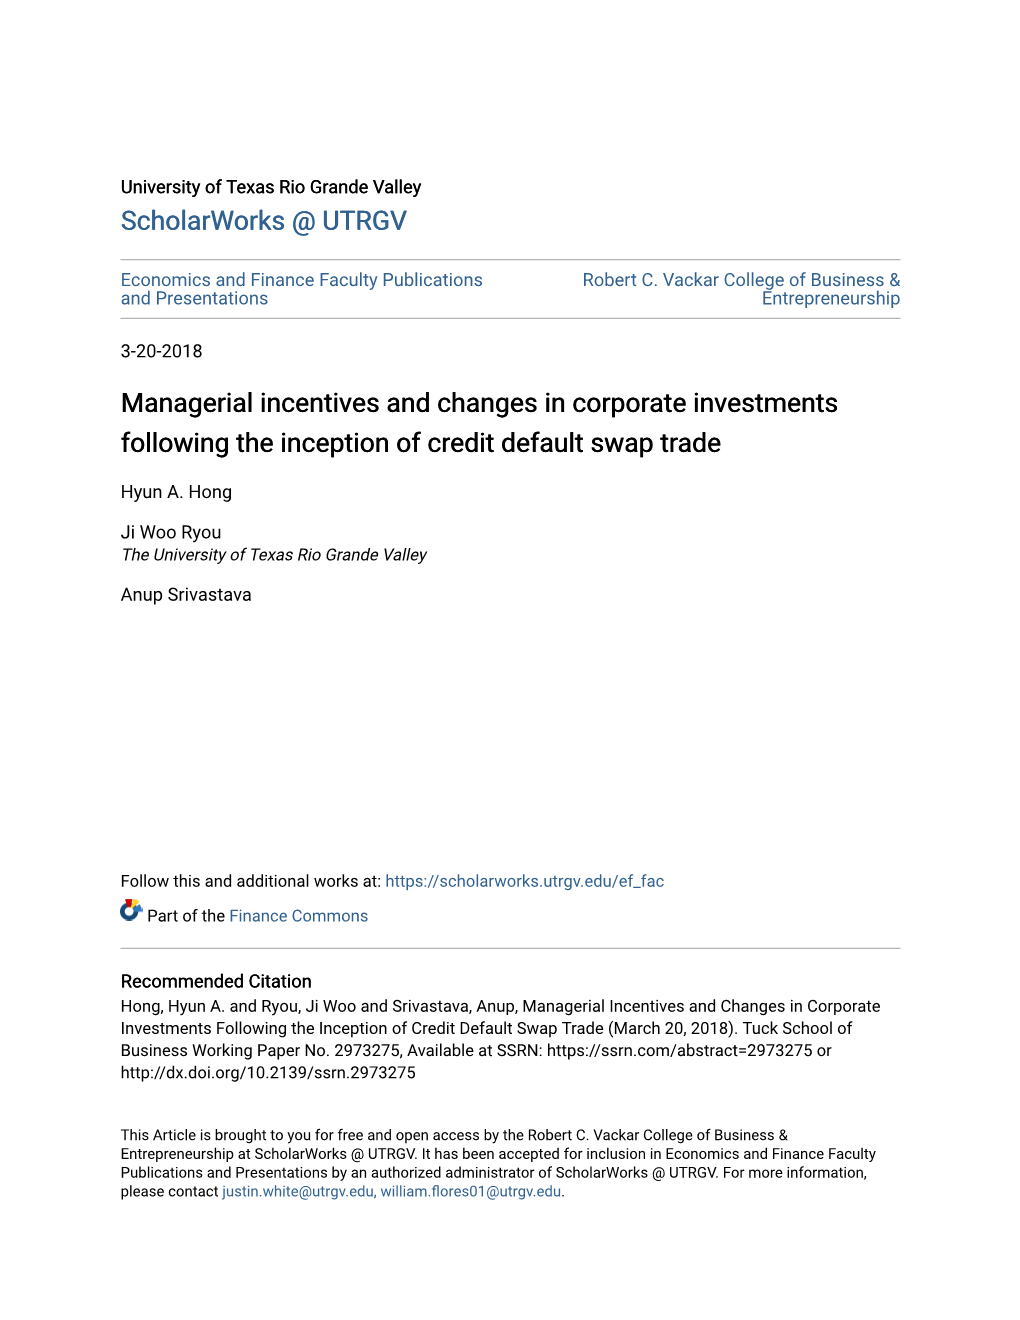 Managerial Incentives and Changes in Corporate Investments Following the Inception of Credit Default Swap Trade